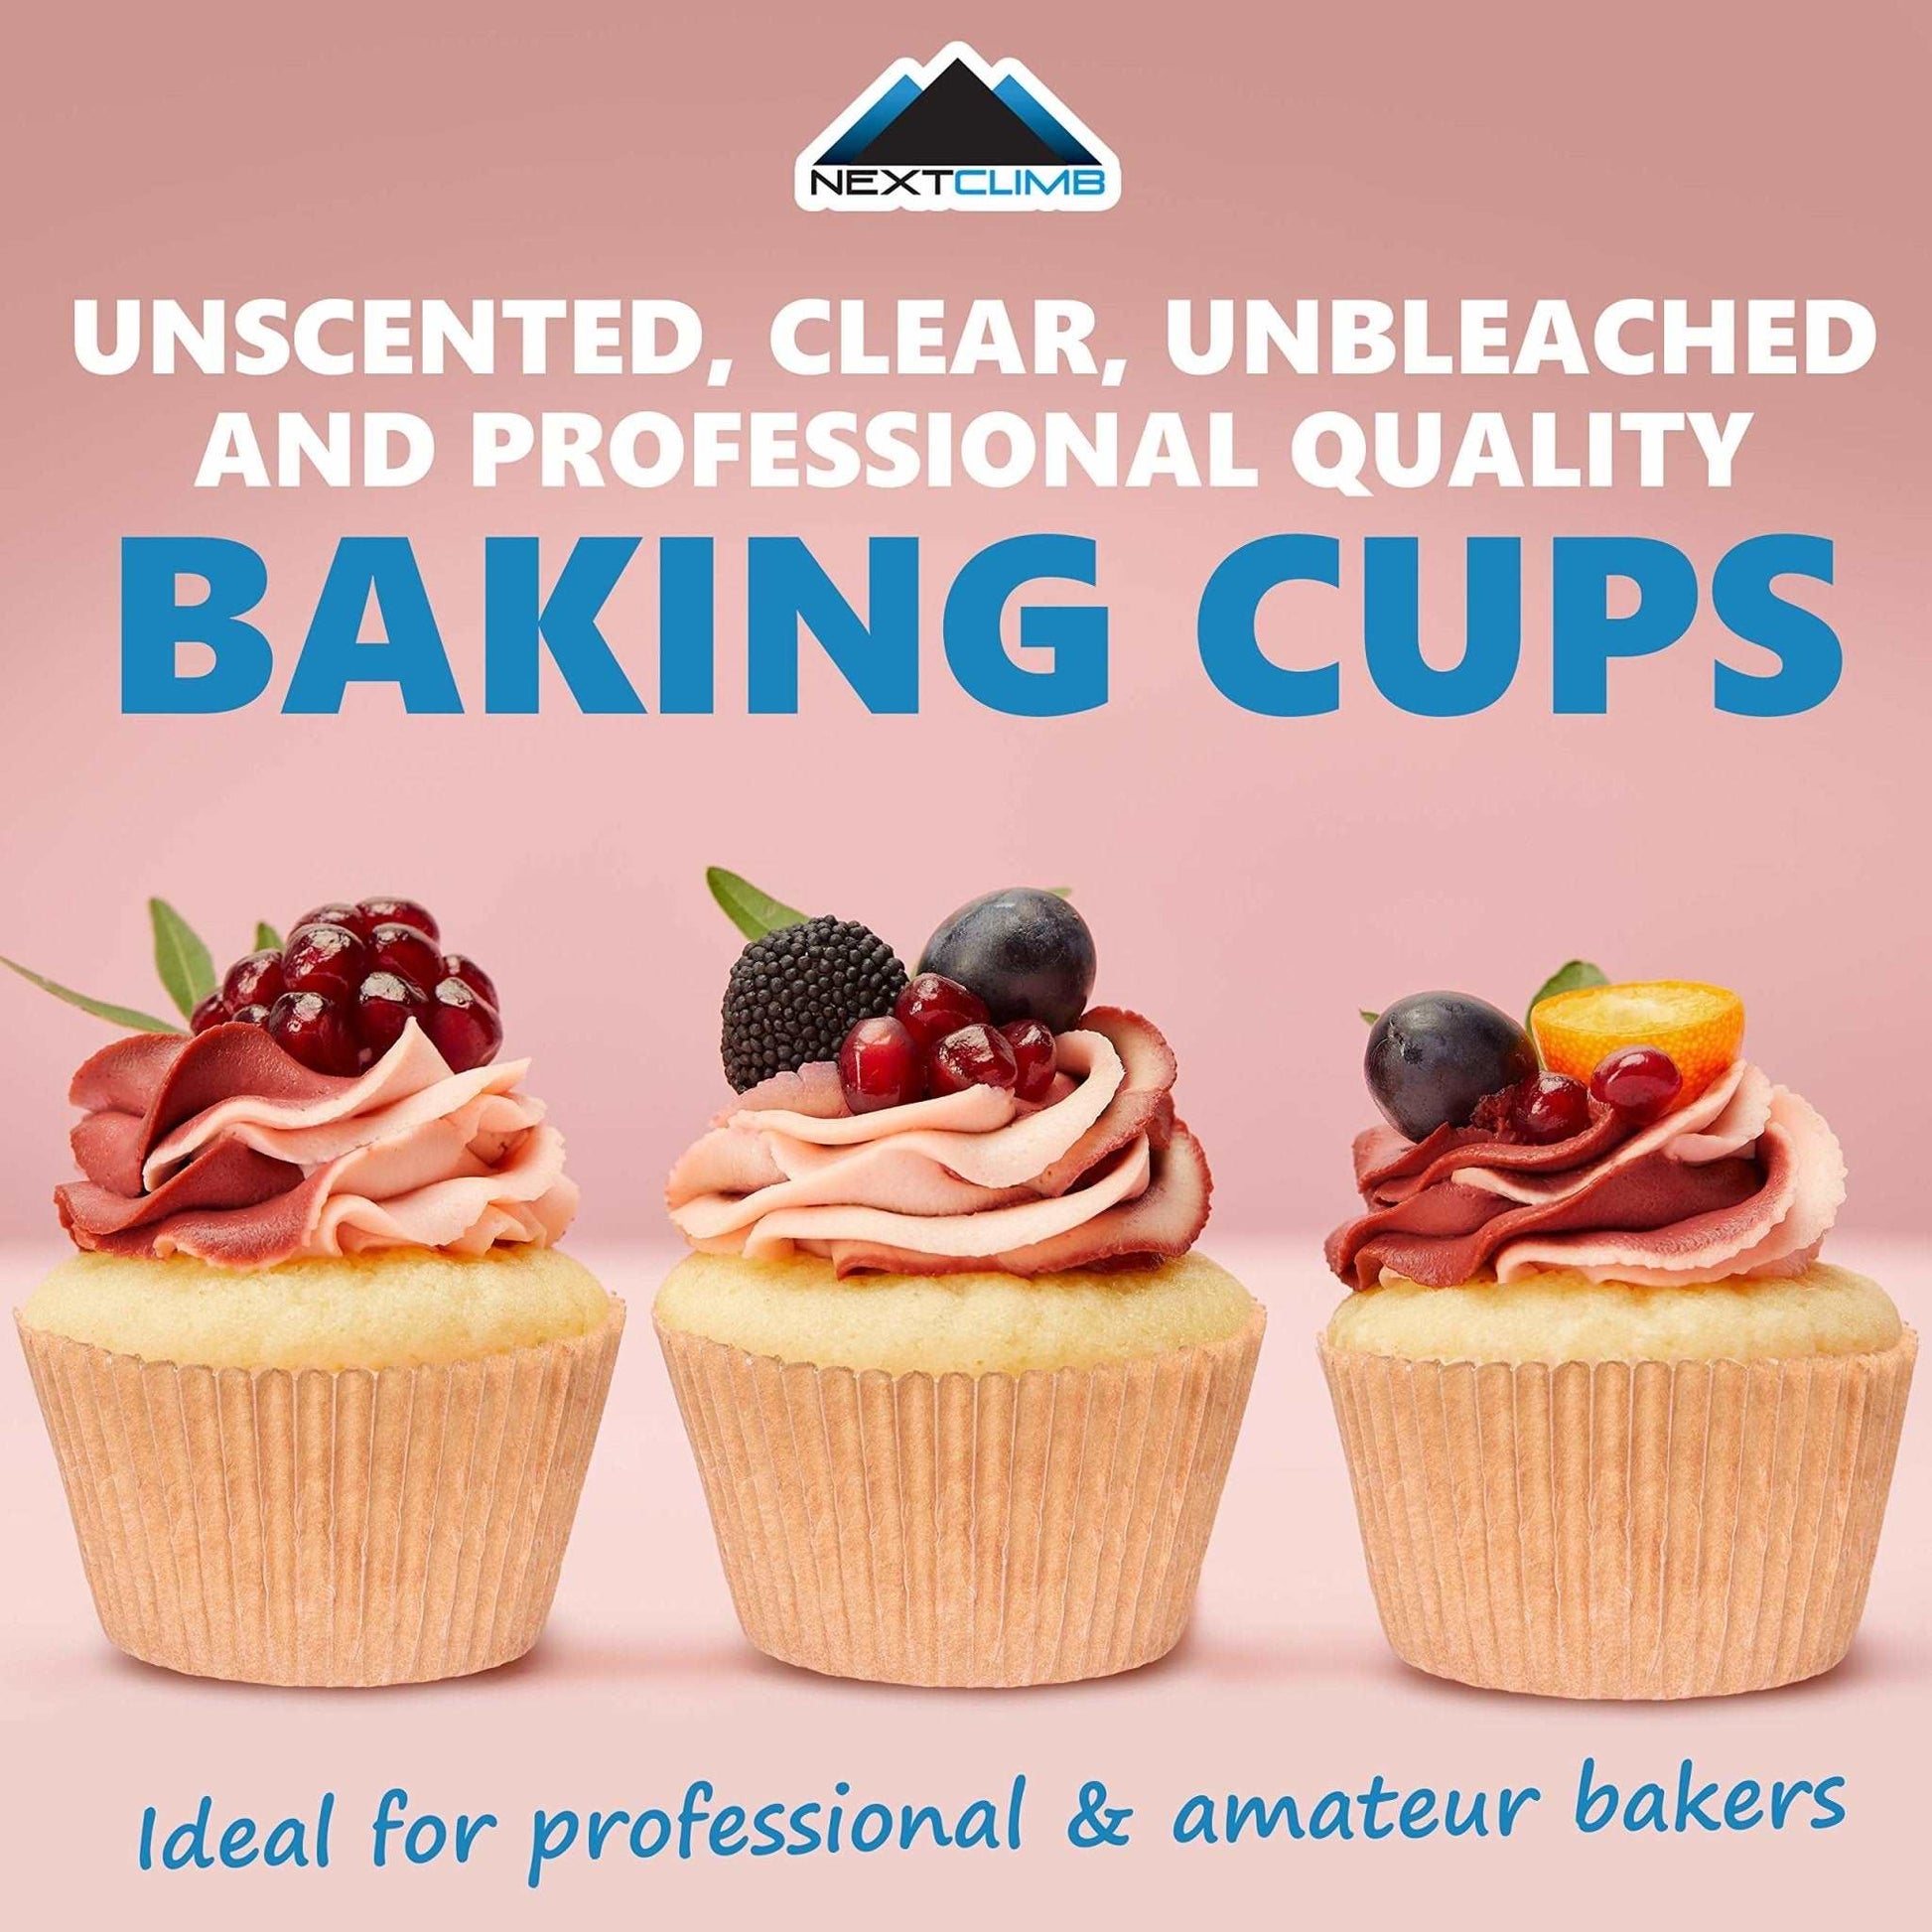 KING / JUMBO Foil Cupcake Liners / Baking Cups – Silver – Cake Connection